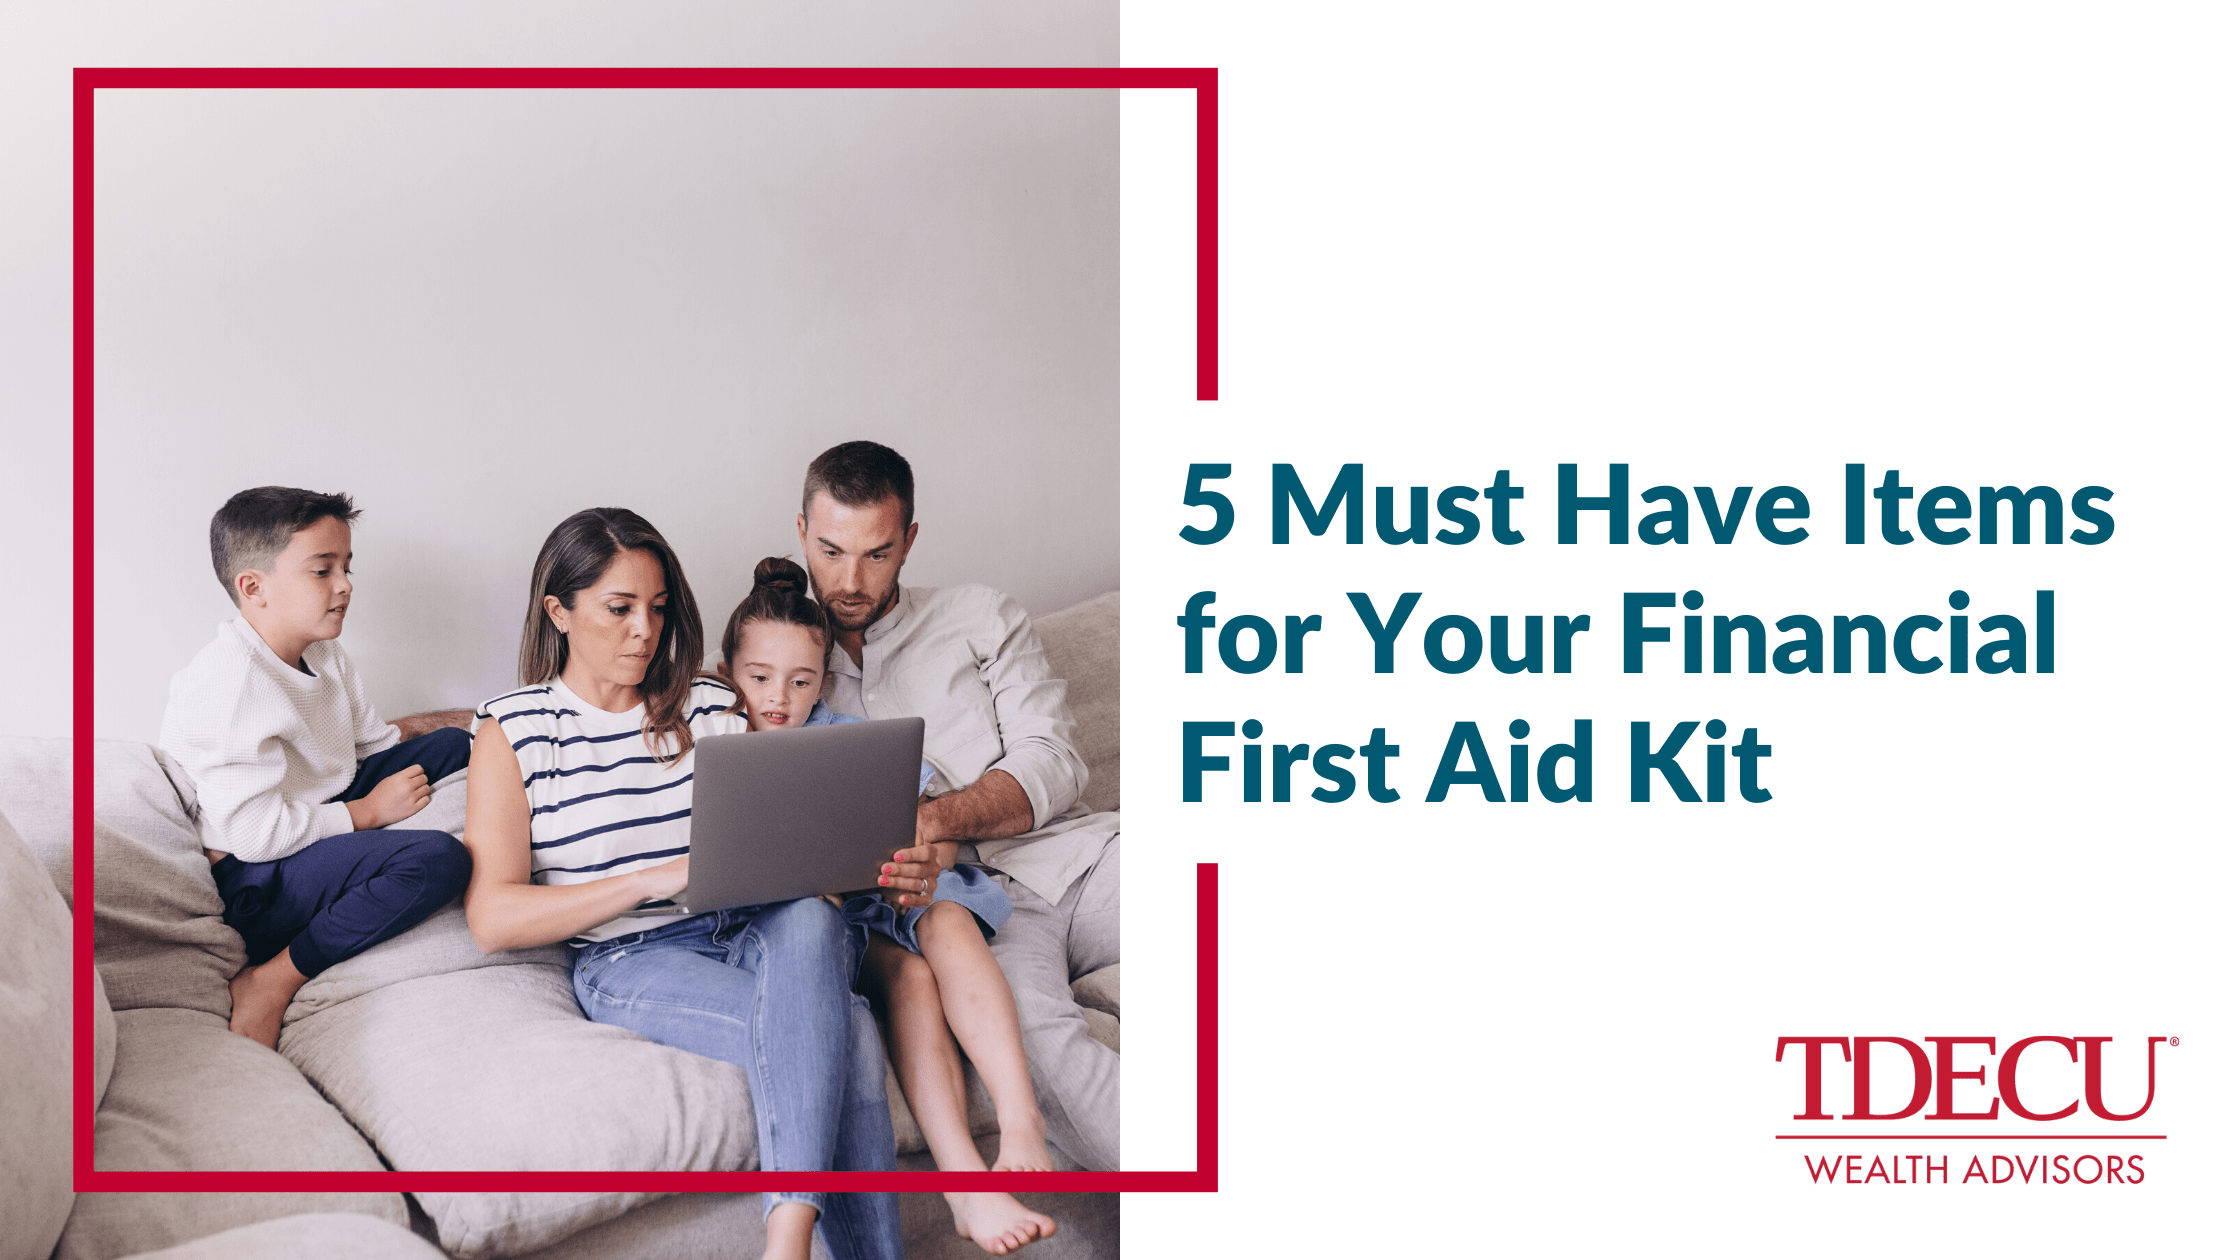 5 Must-Have Items for Your Financial First Aid Kit